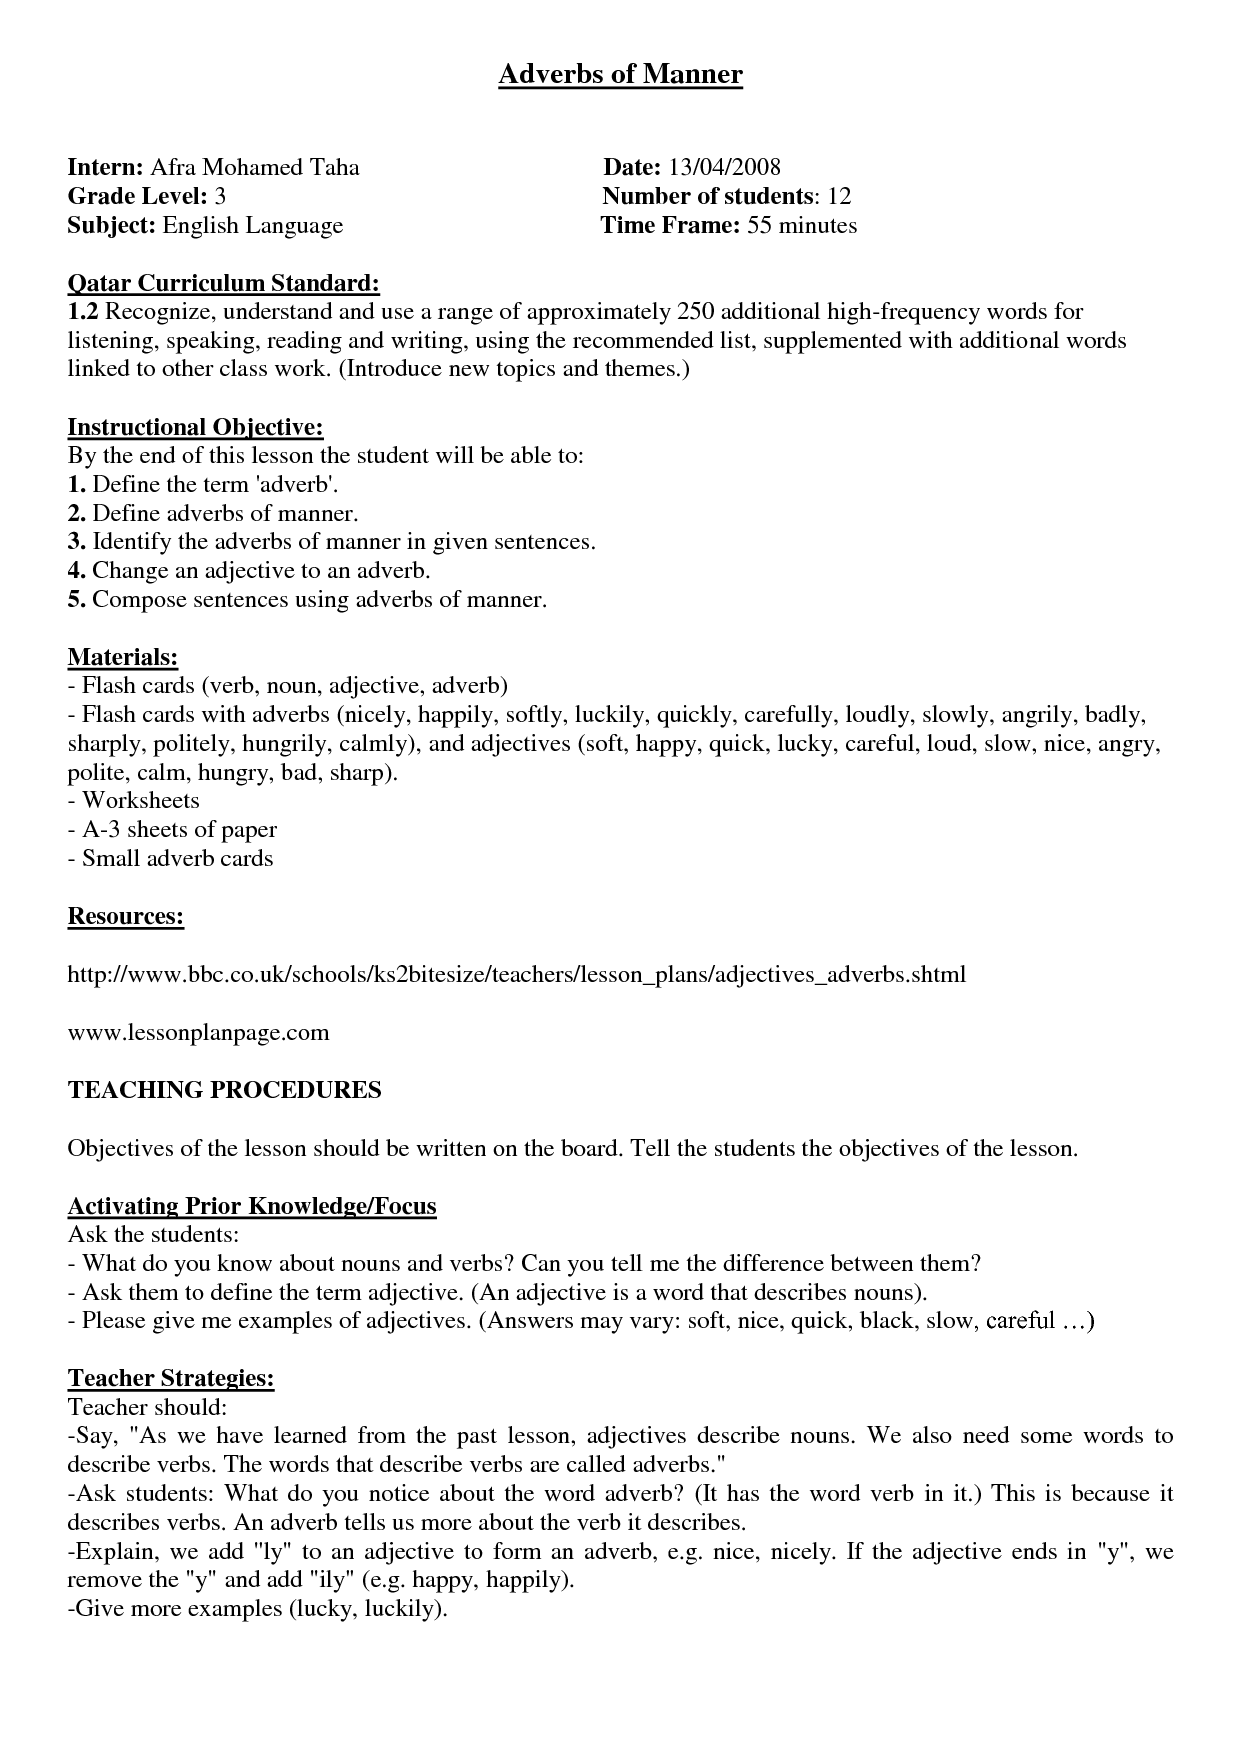 sequence-adverbs-esl-worksheet-by-oppilif